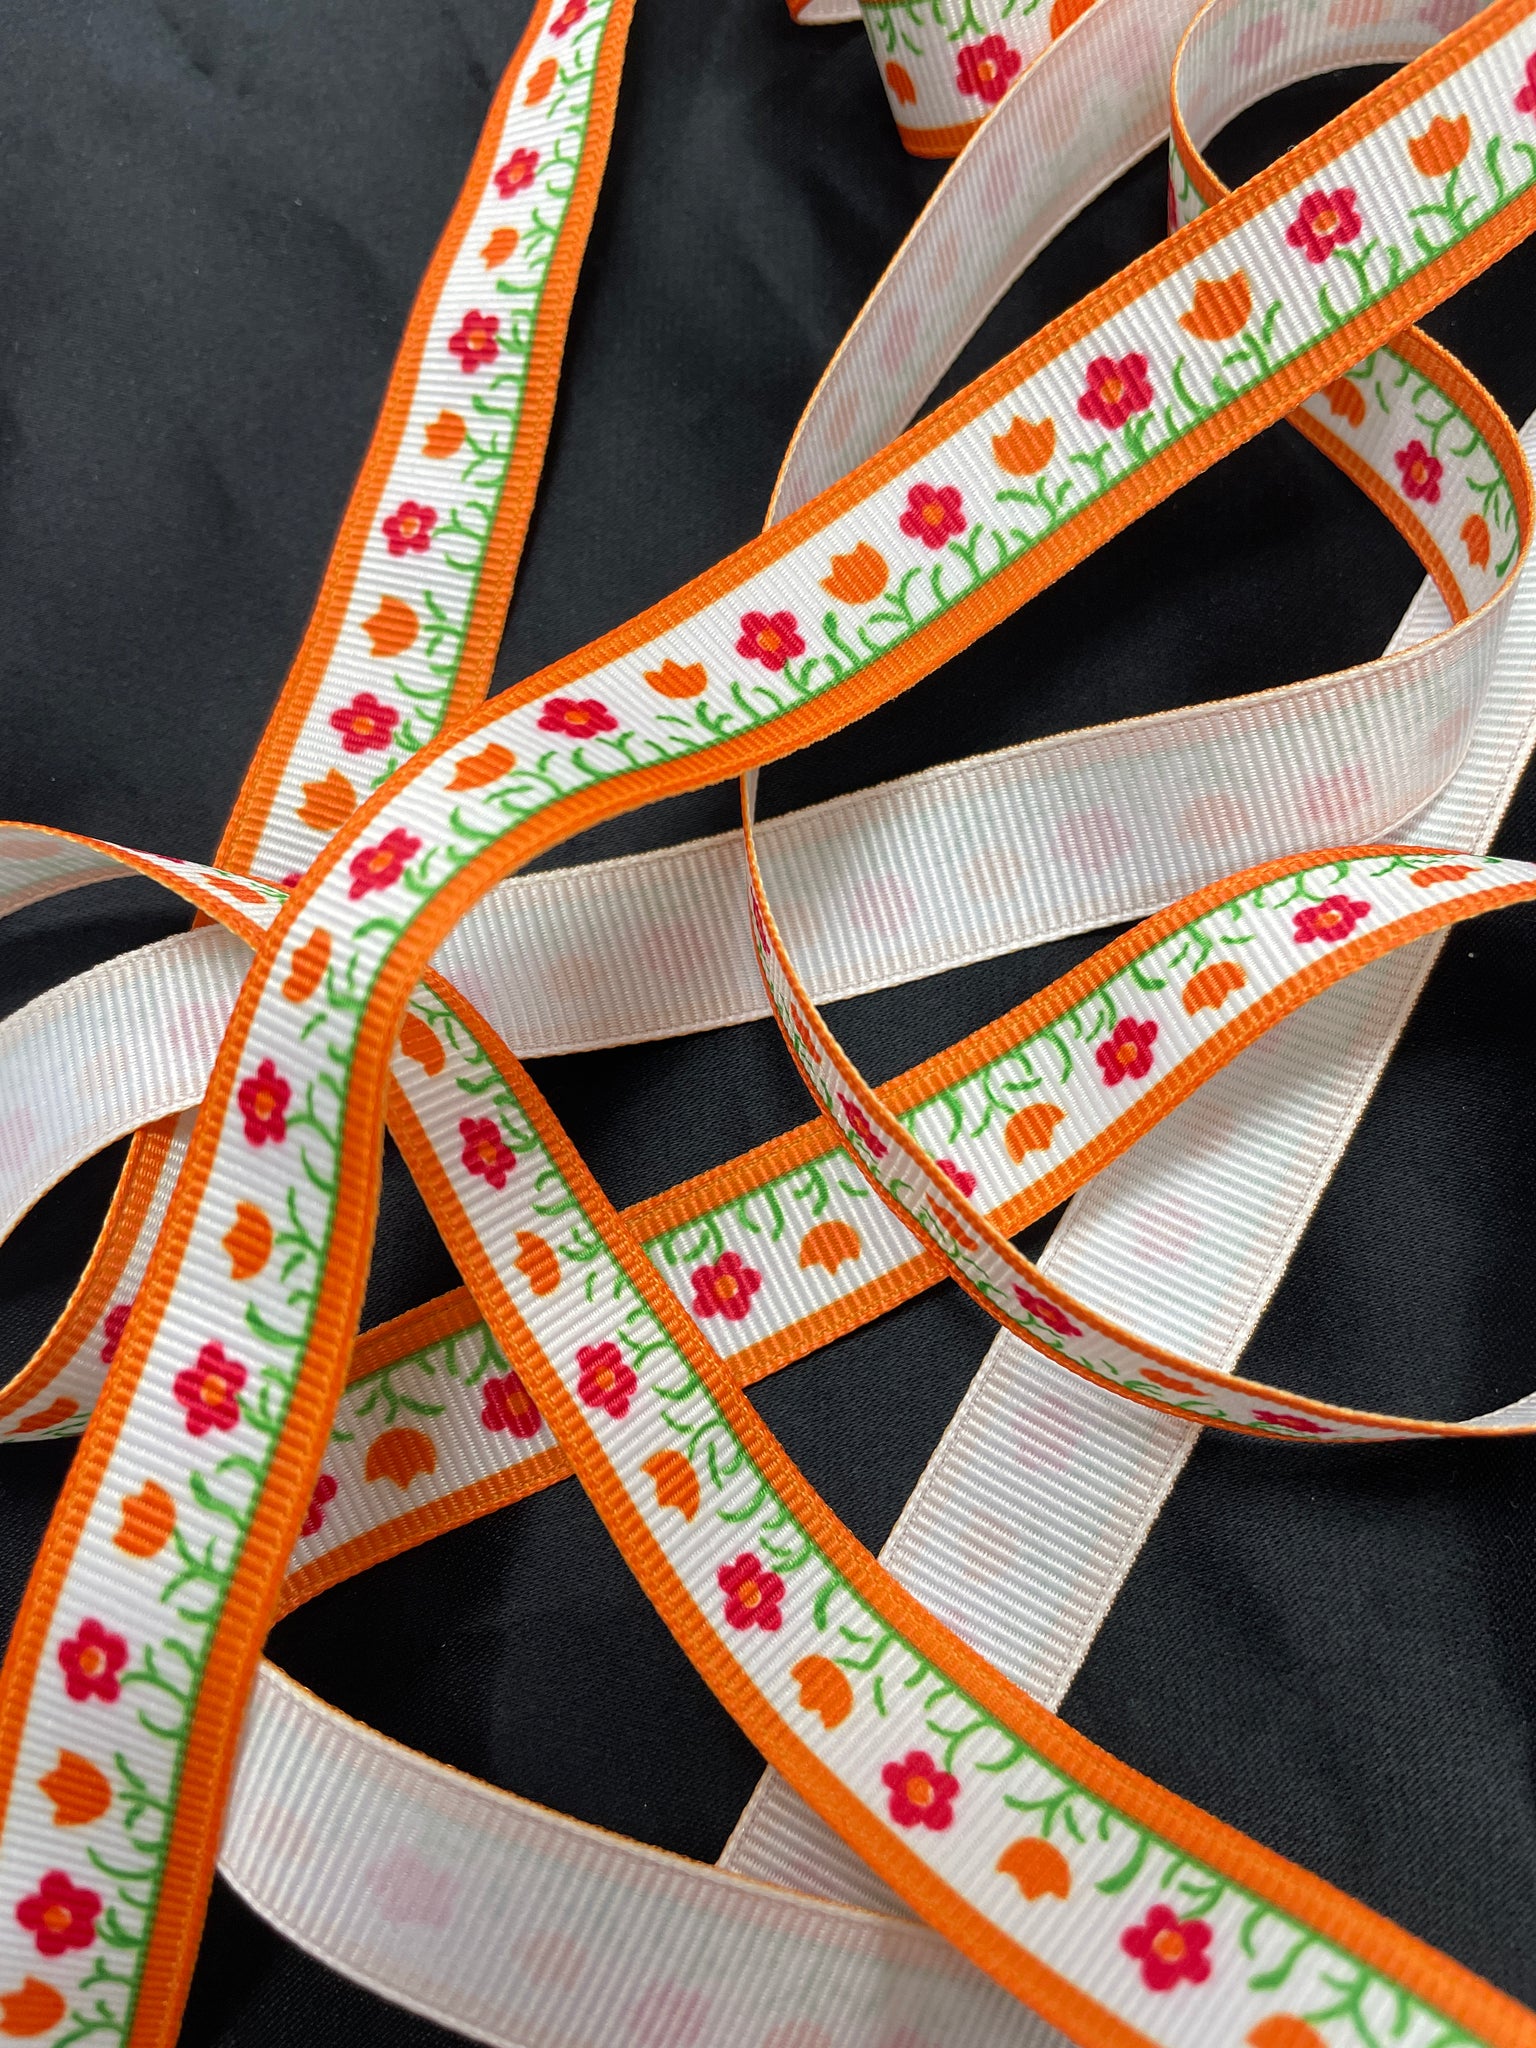 2 1/3 YD Polyester Printed Grosgrain Ribbon - White with Pink and Orange Flowers